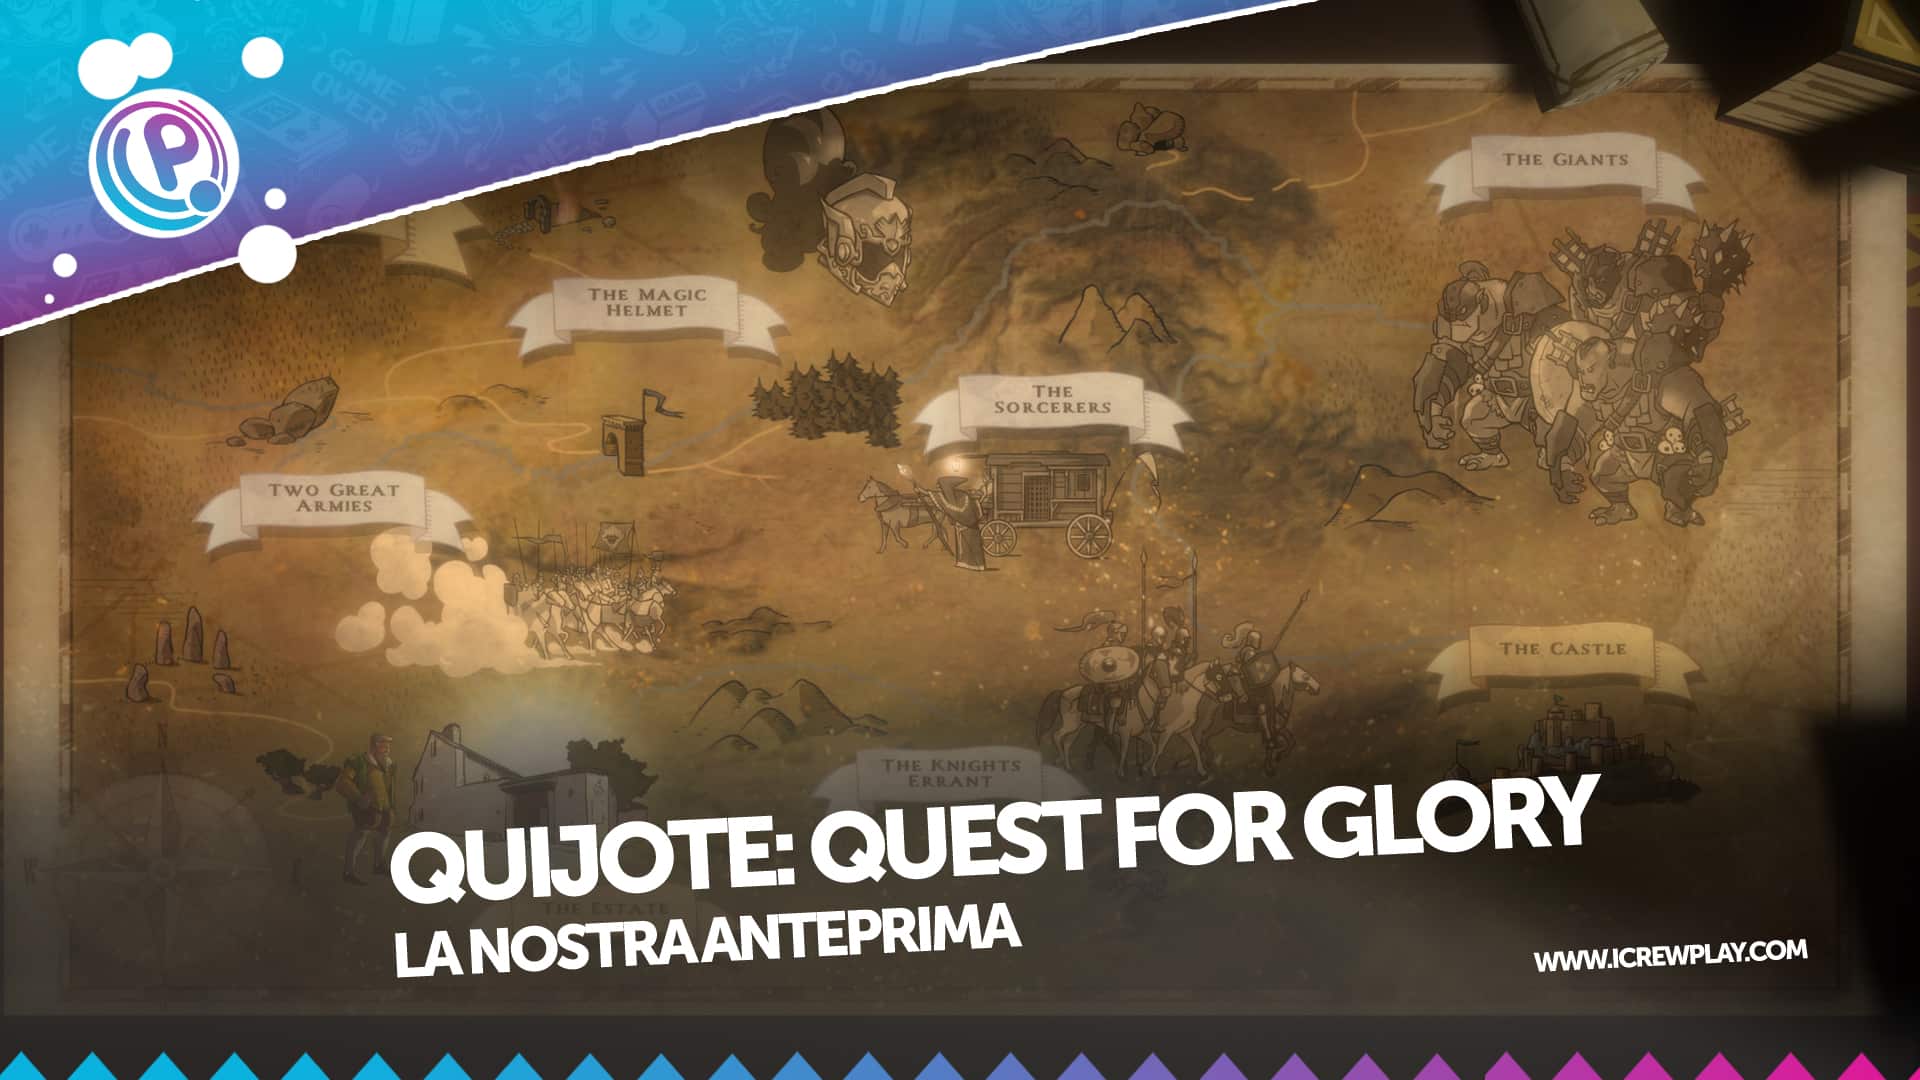 QUIJOTE Quest for Glory